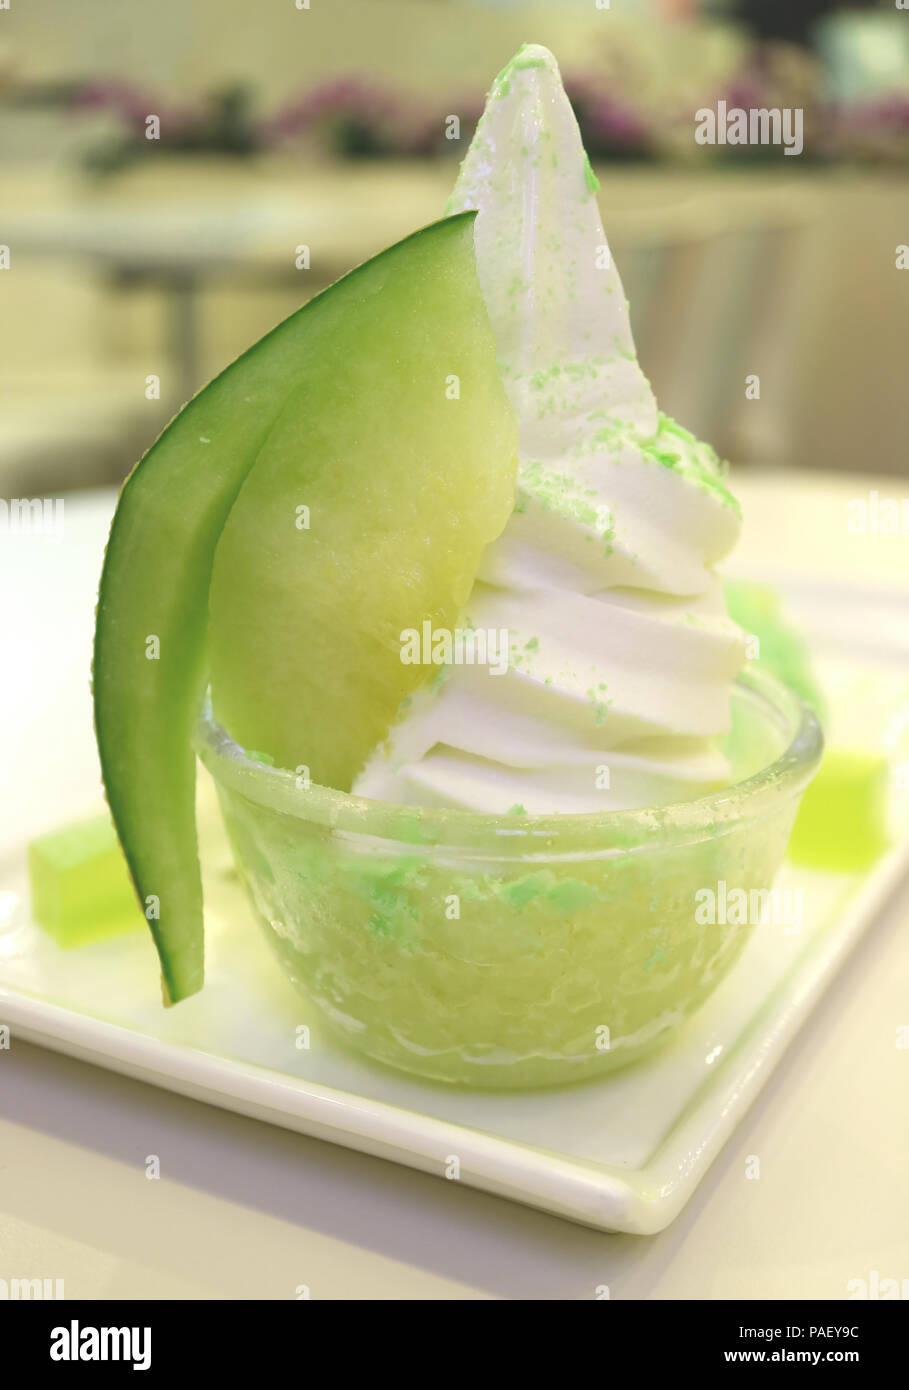 Milk Soft Serve Ice Cream with Sliced Cantaloupe Melon Fruit topped on Granita in a Glass Bowl Served on White Table Stock Photo